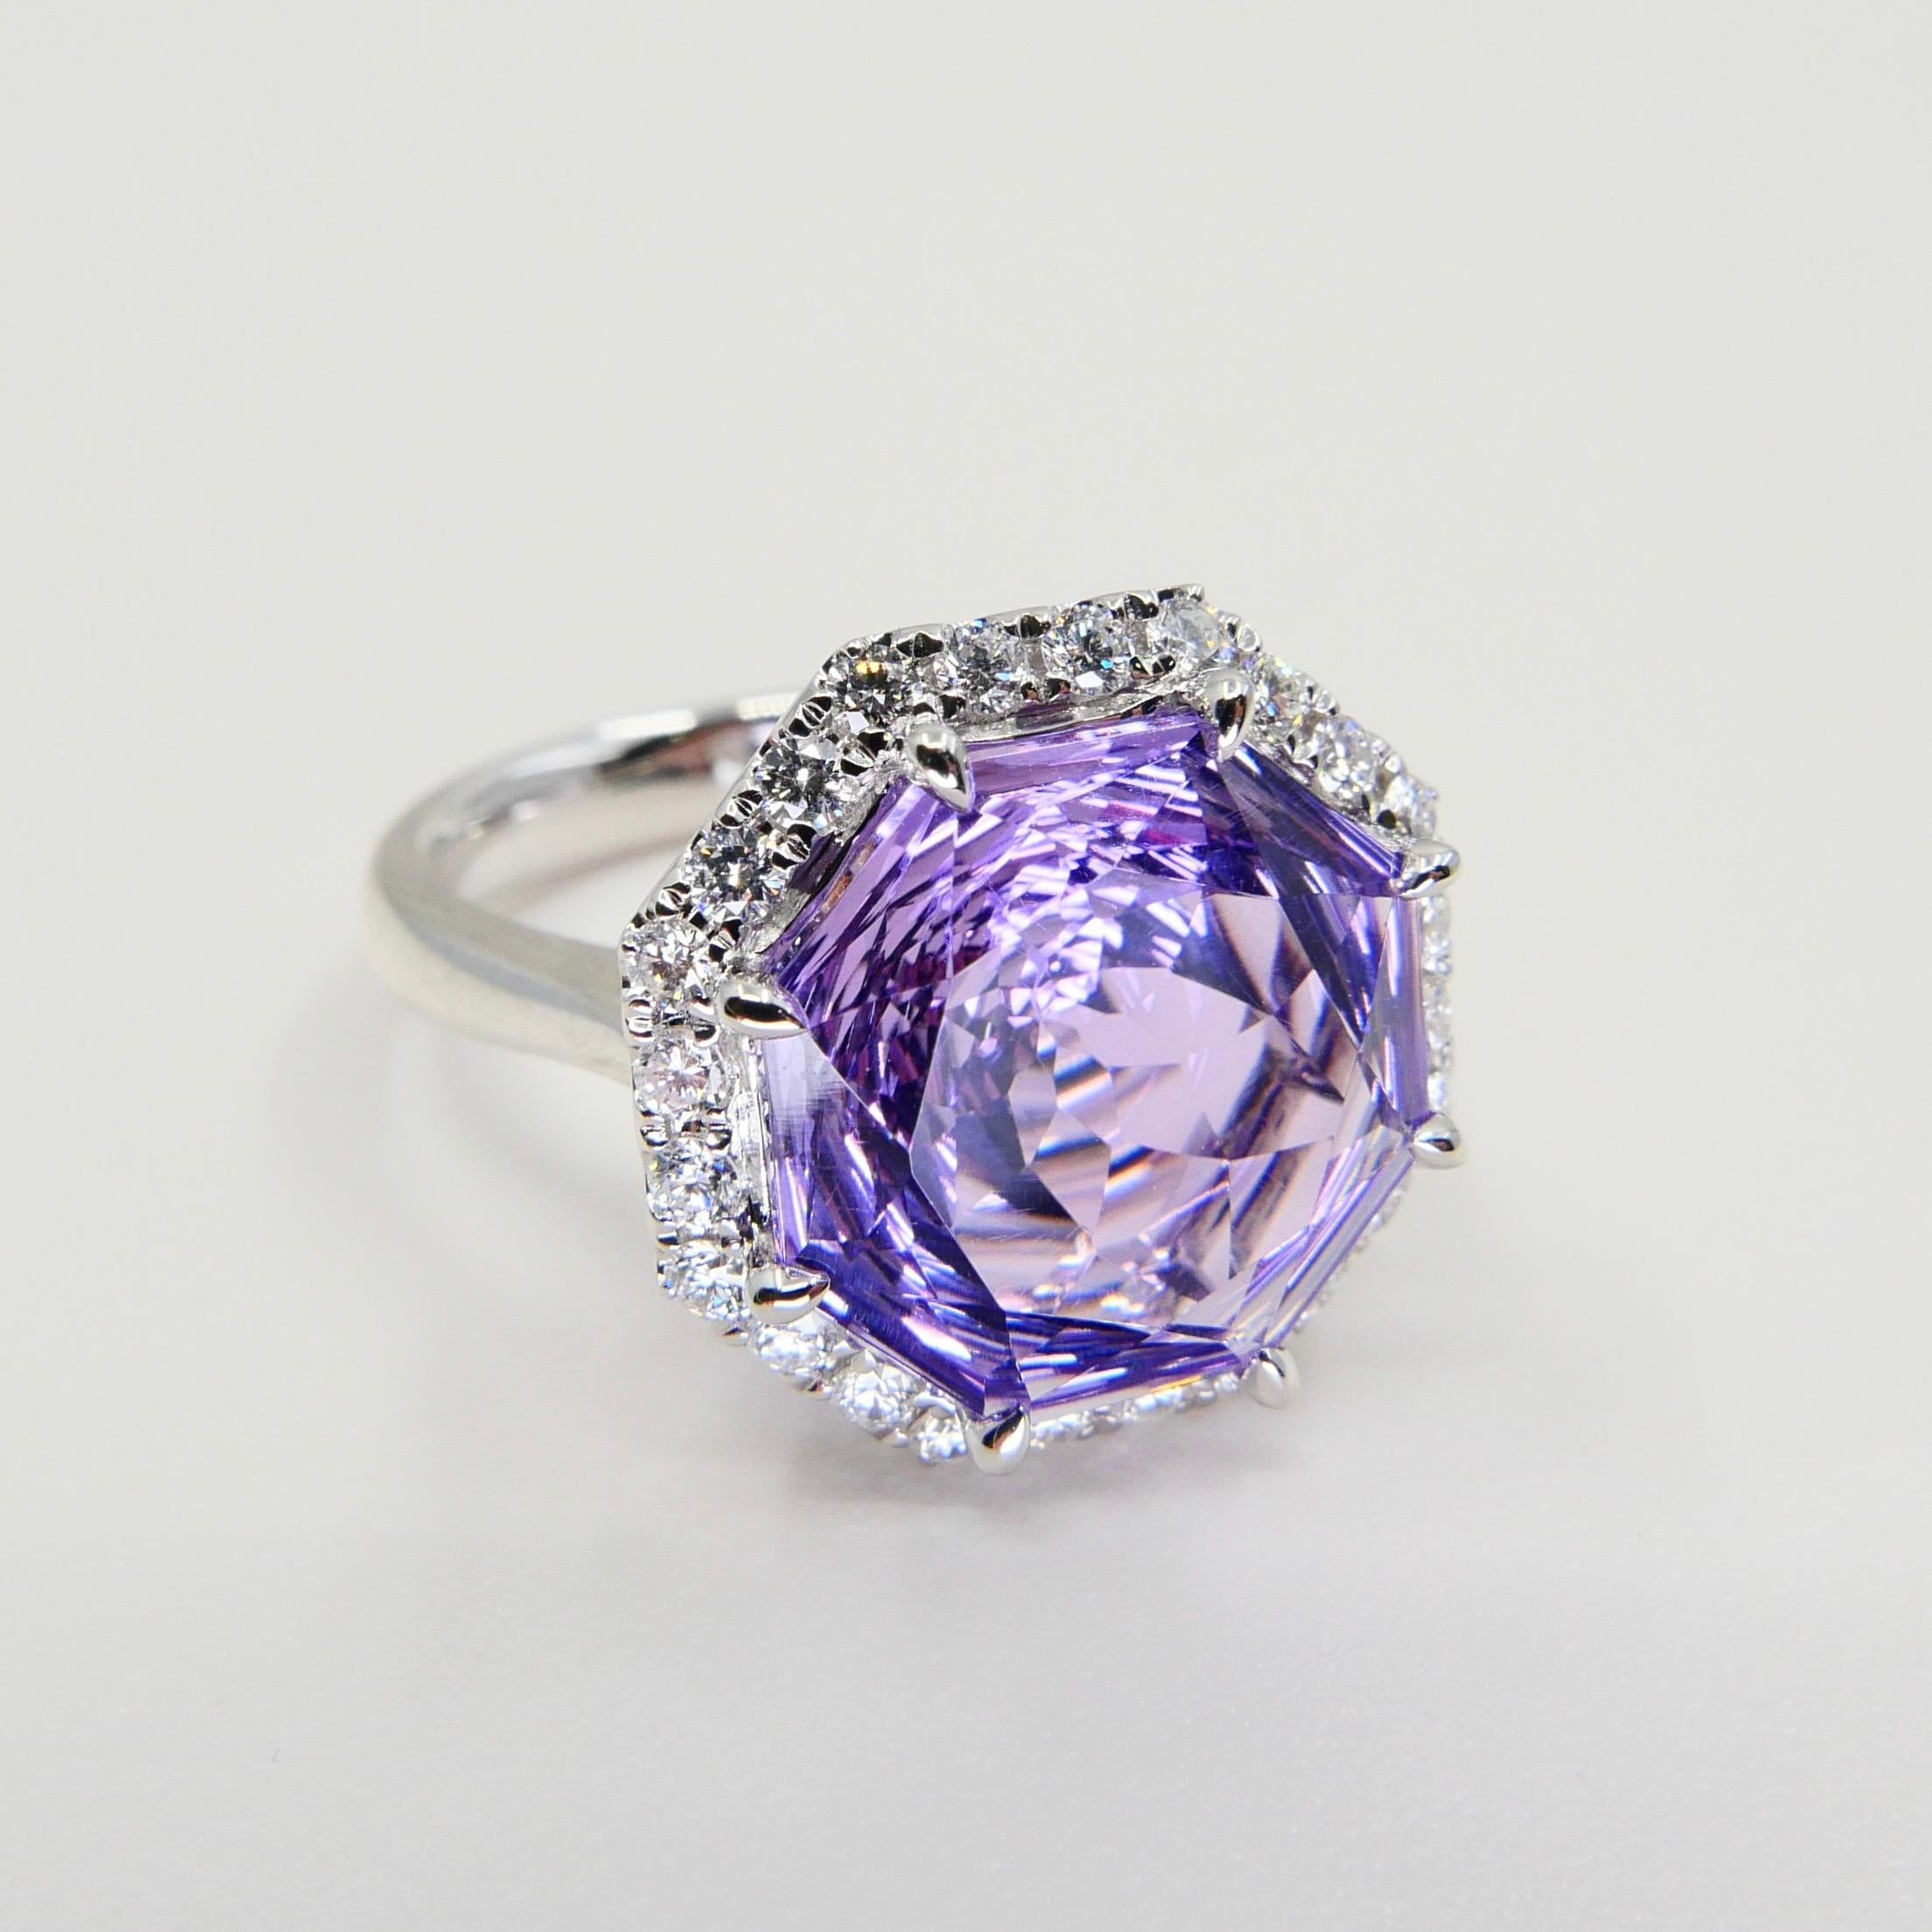 5.32 Carat Flower Cut Amethyst and Diamond Cocktail Ring, Statement Ring 7